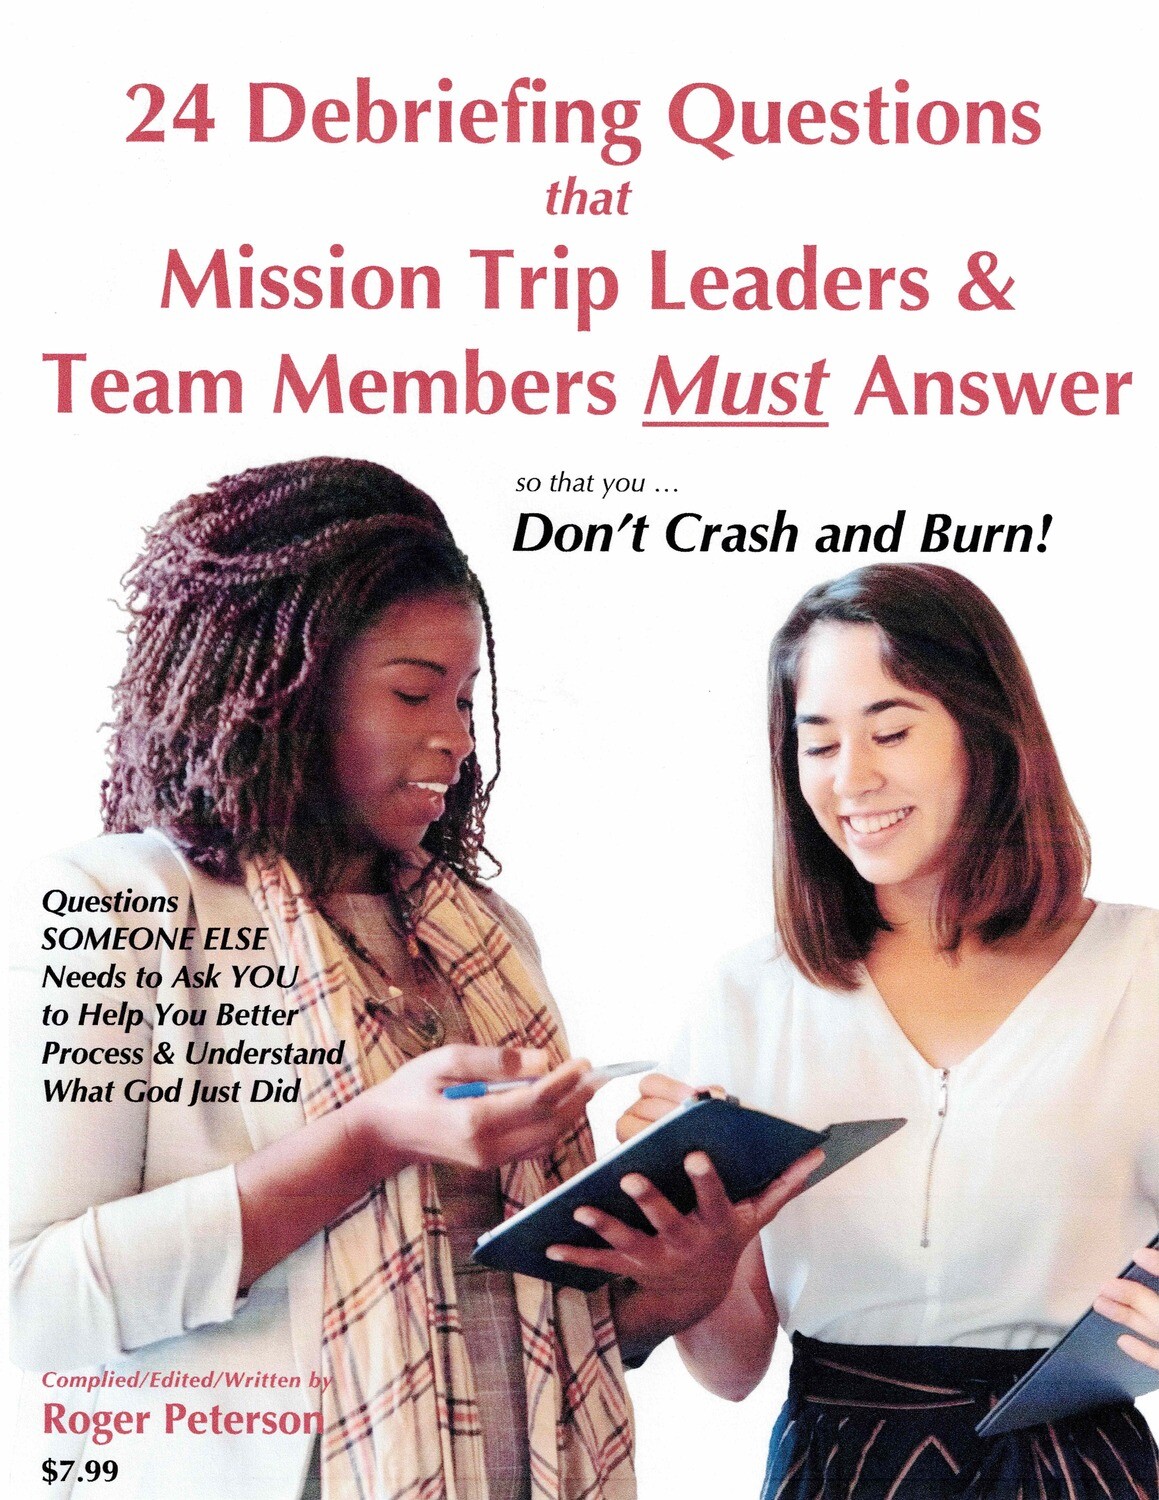 24 Debriefing Questions Mission Trip Leaders & Team Members MUST Answer!